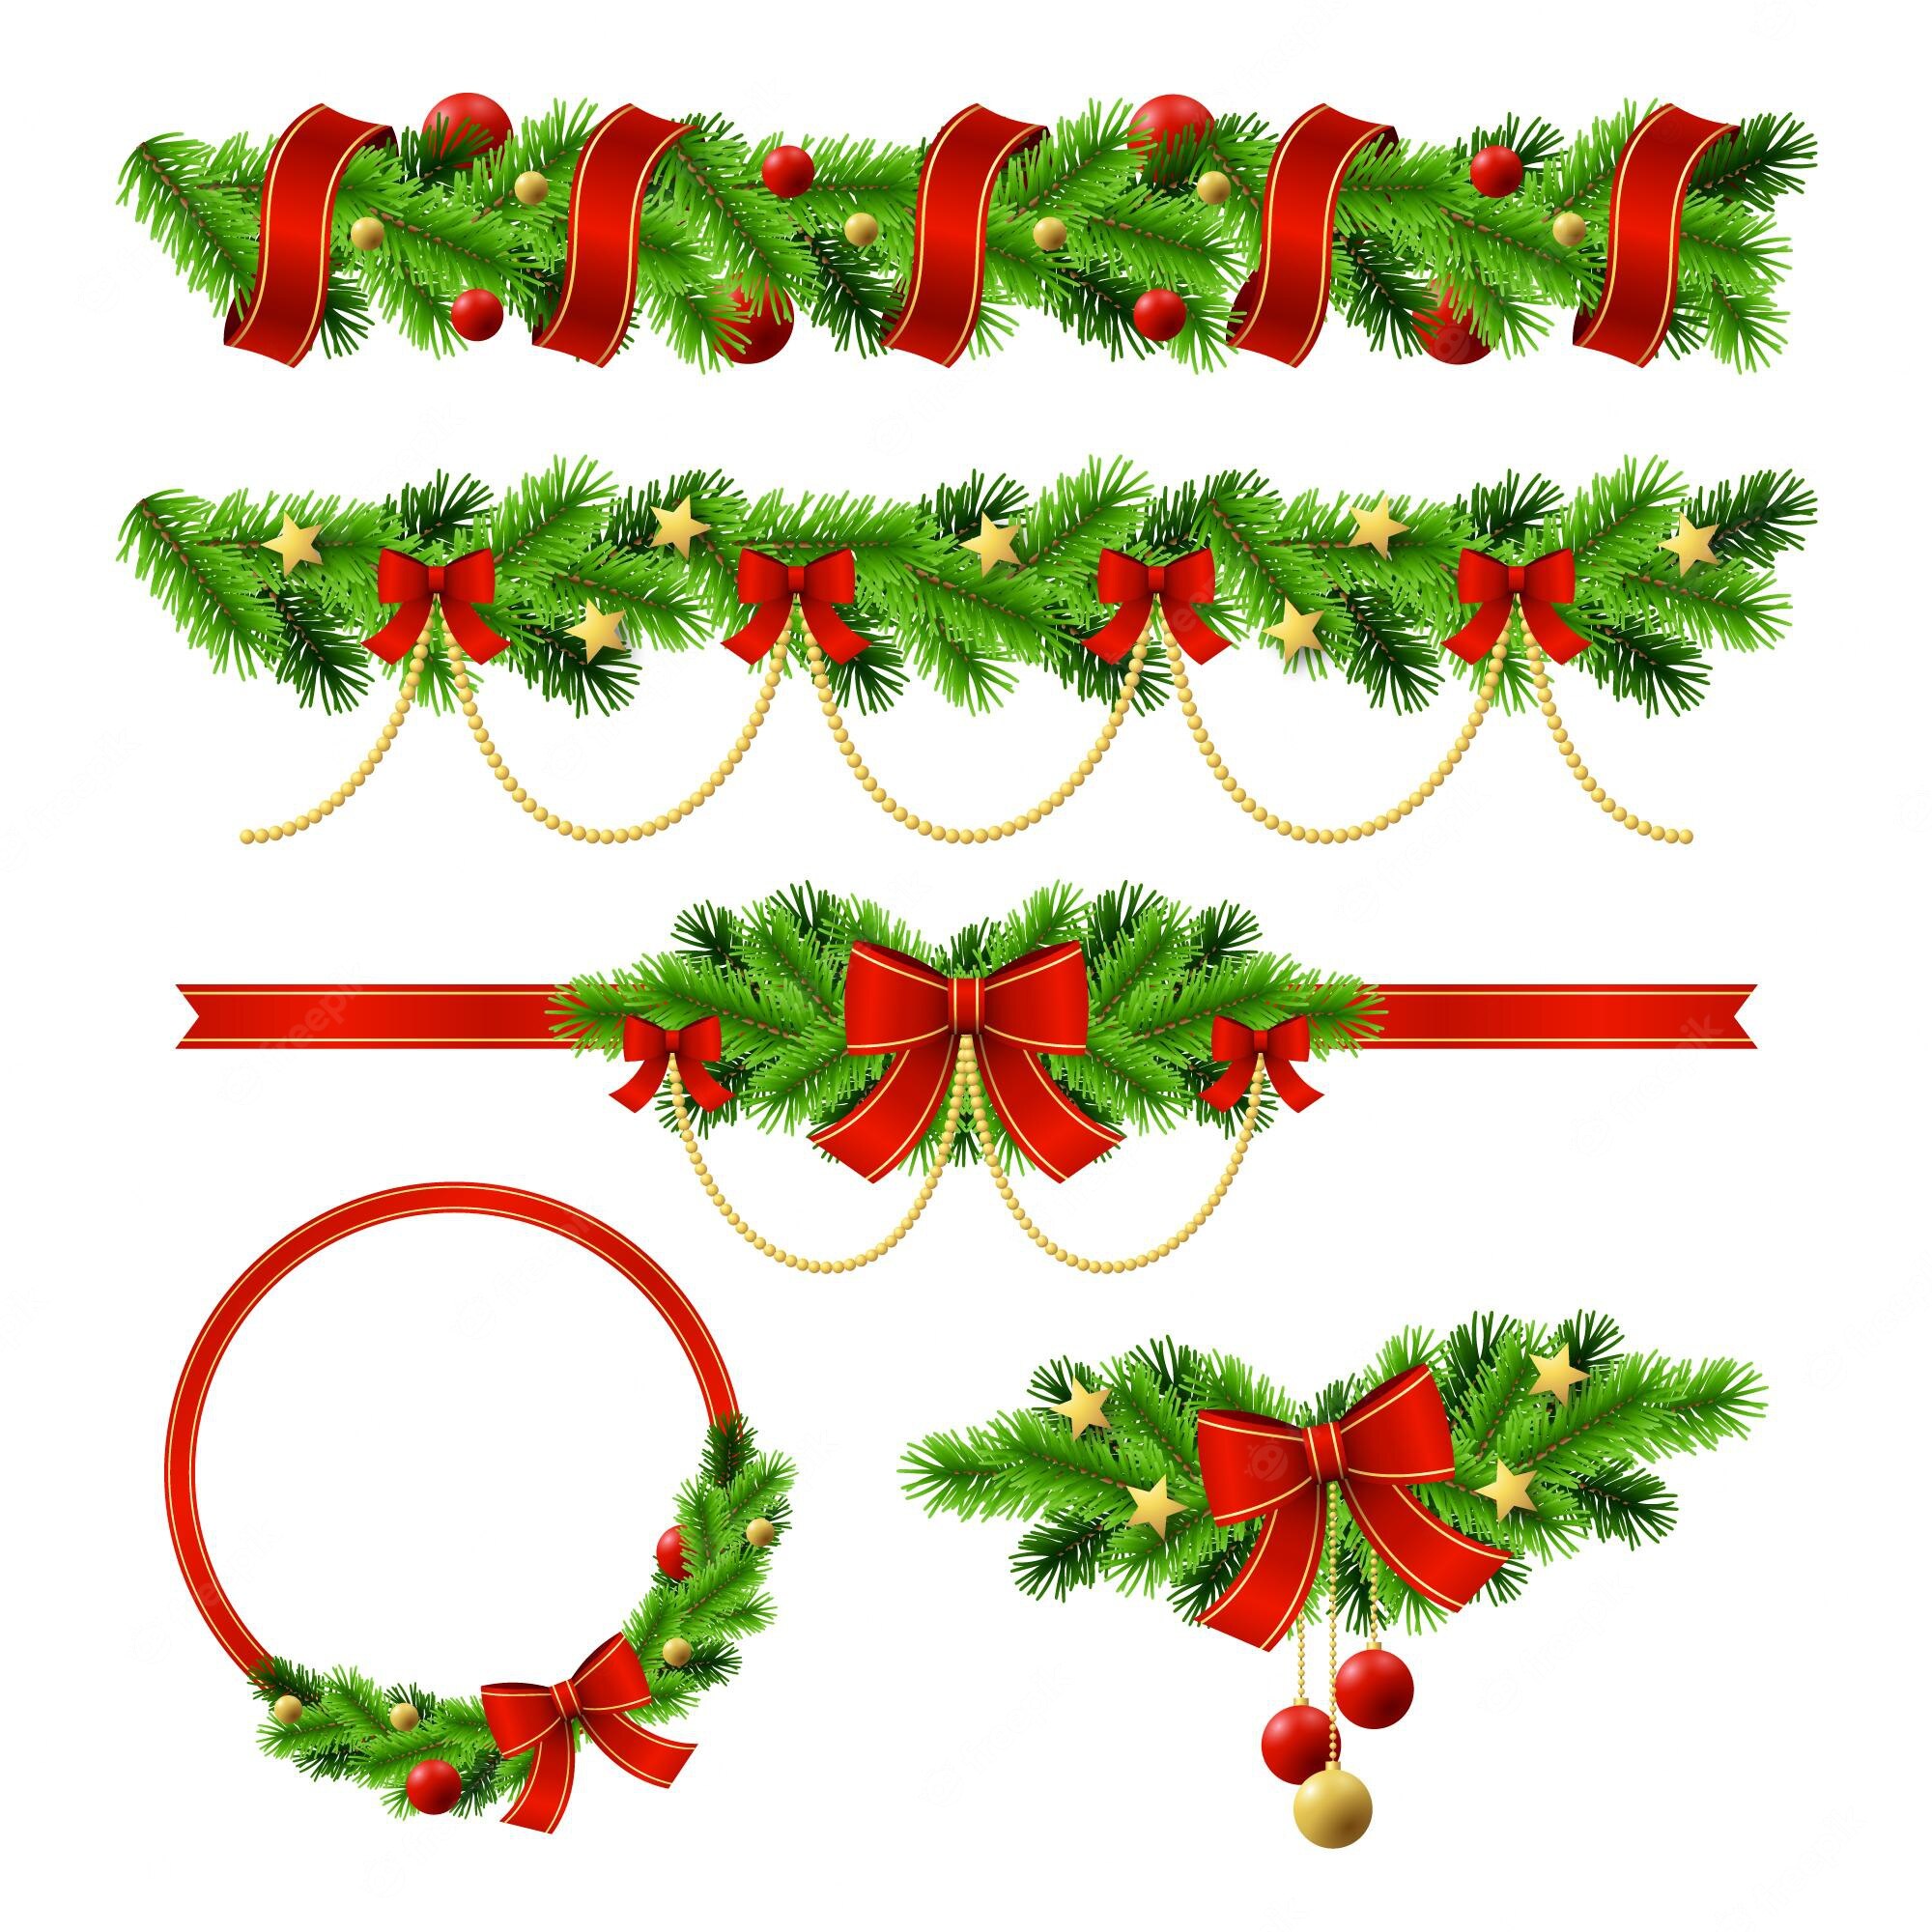 Christmas Garland Border Images - Free Download on Clipart Library ...